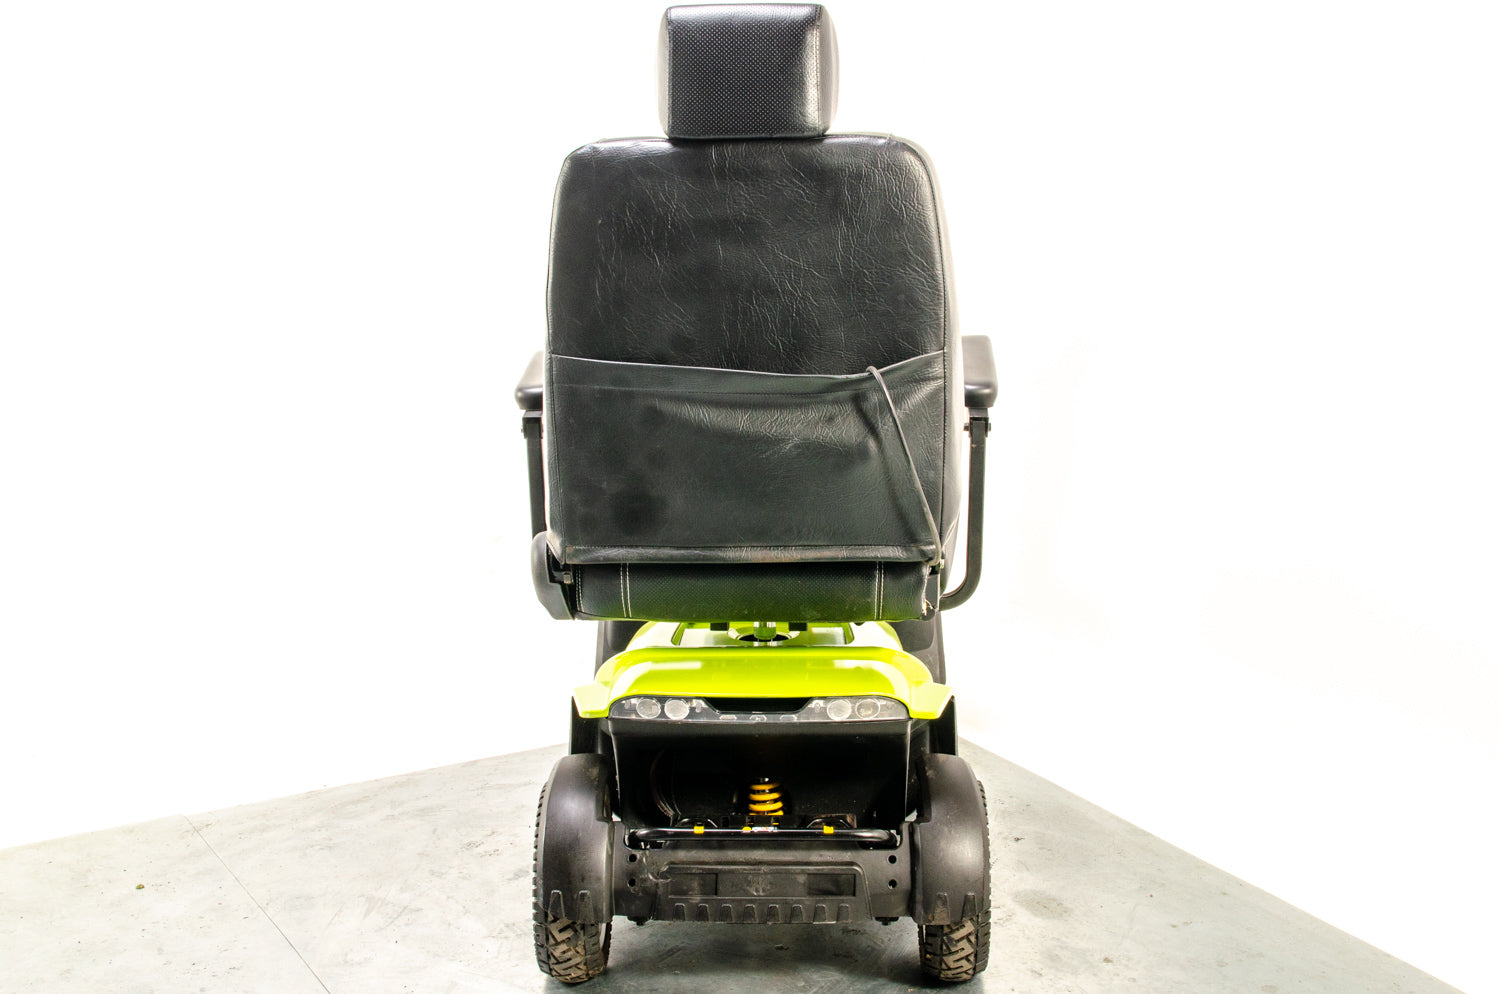 Pride Colt Executive Used Mobility Scooter All-Terrain Off-Road 8mph Road Legal Green Bariatric Seat